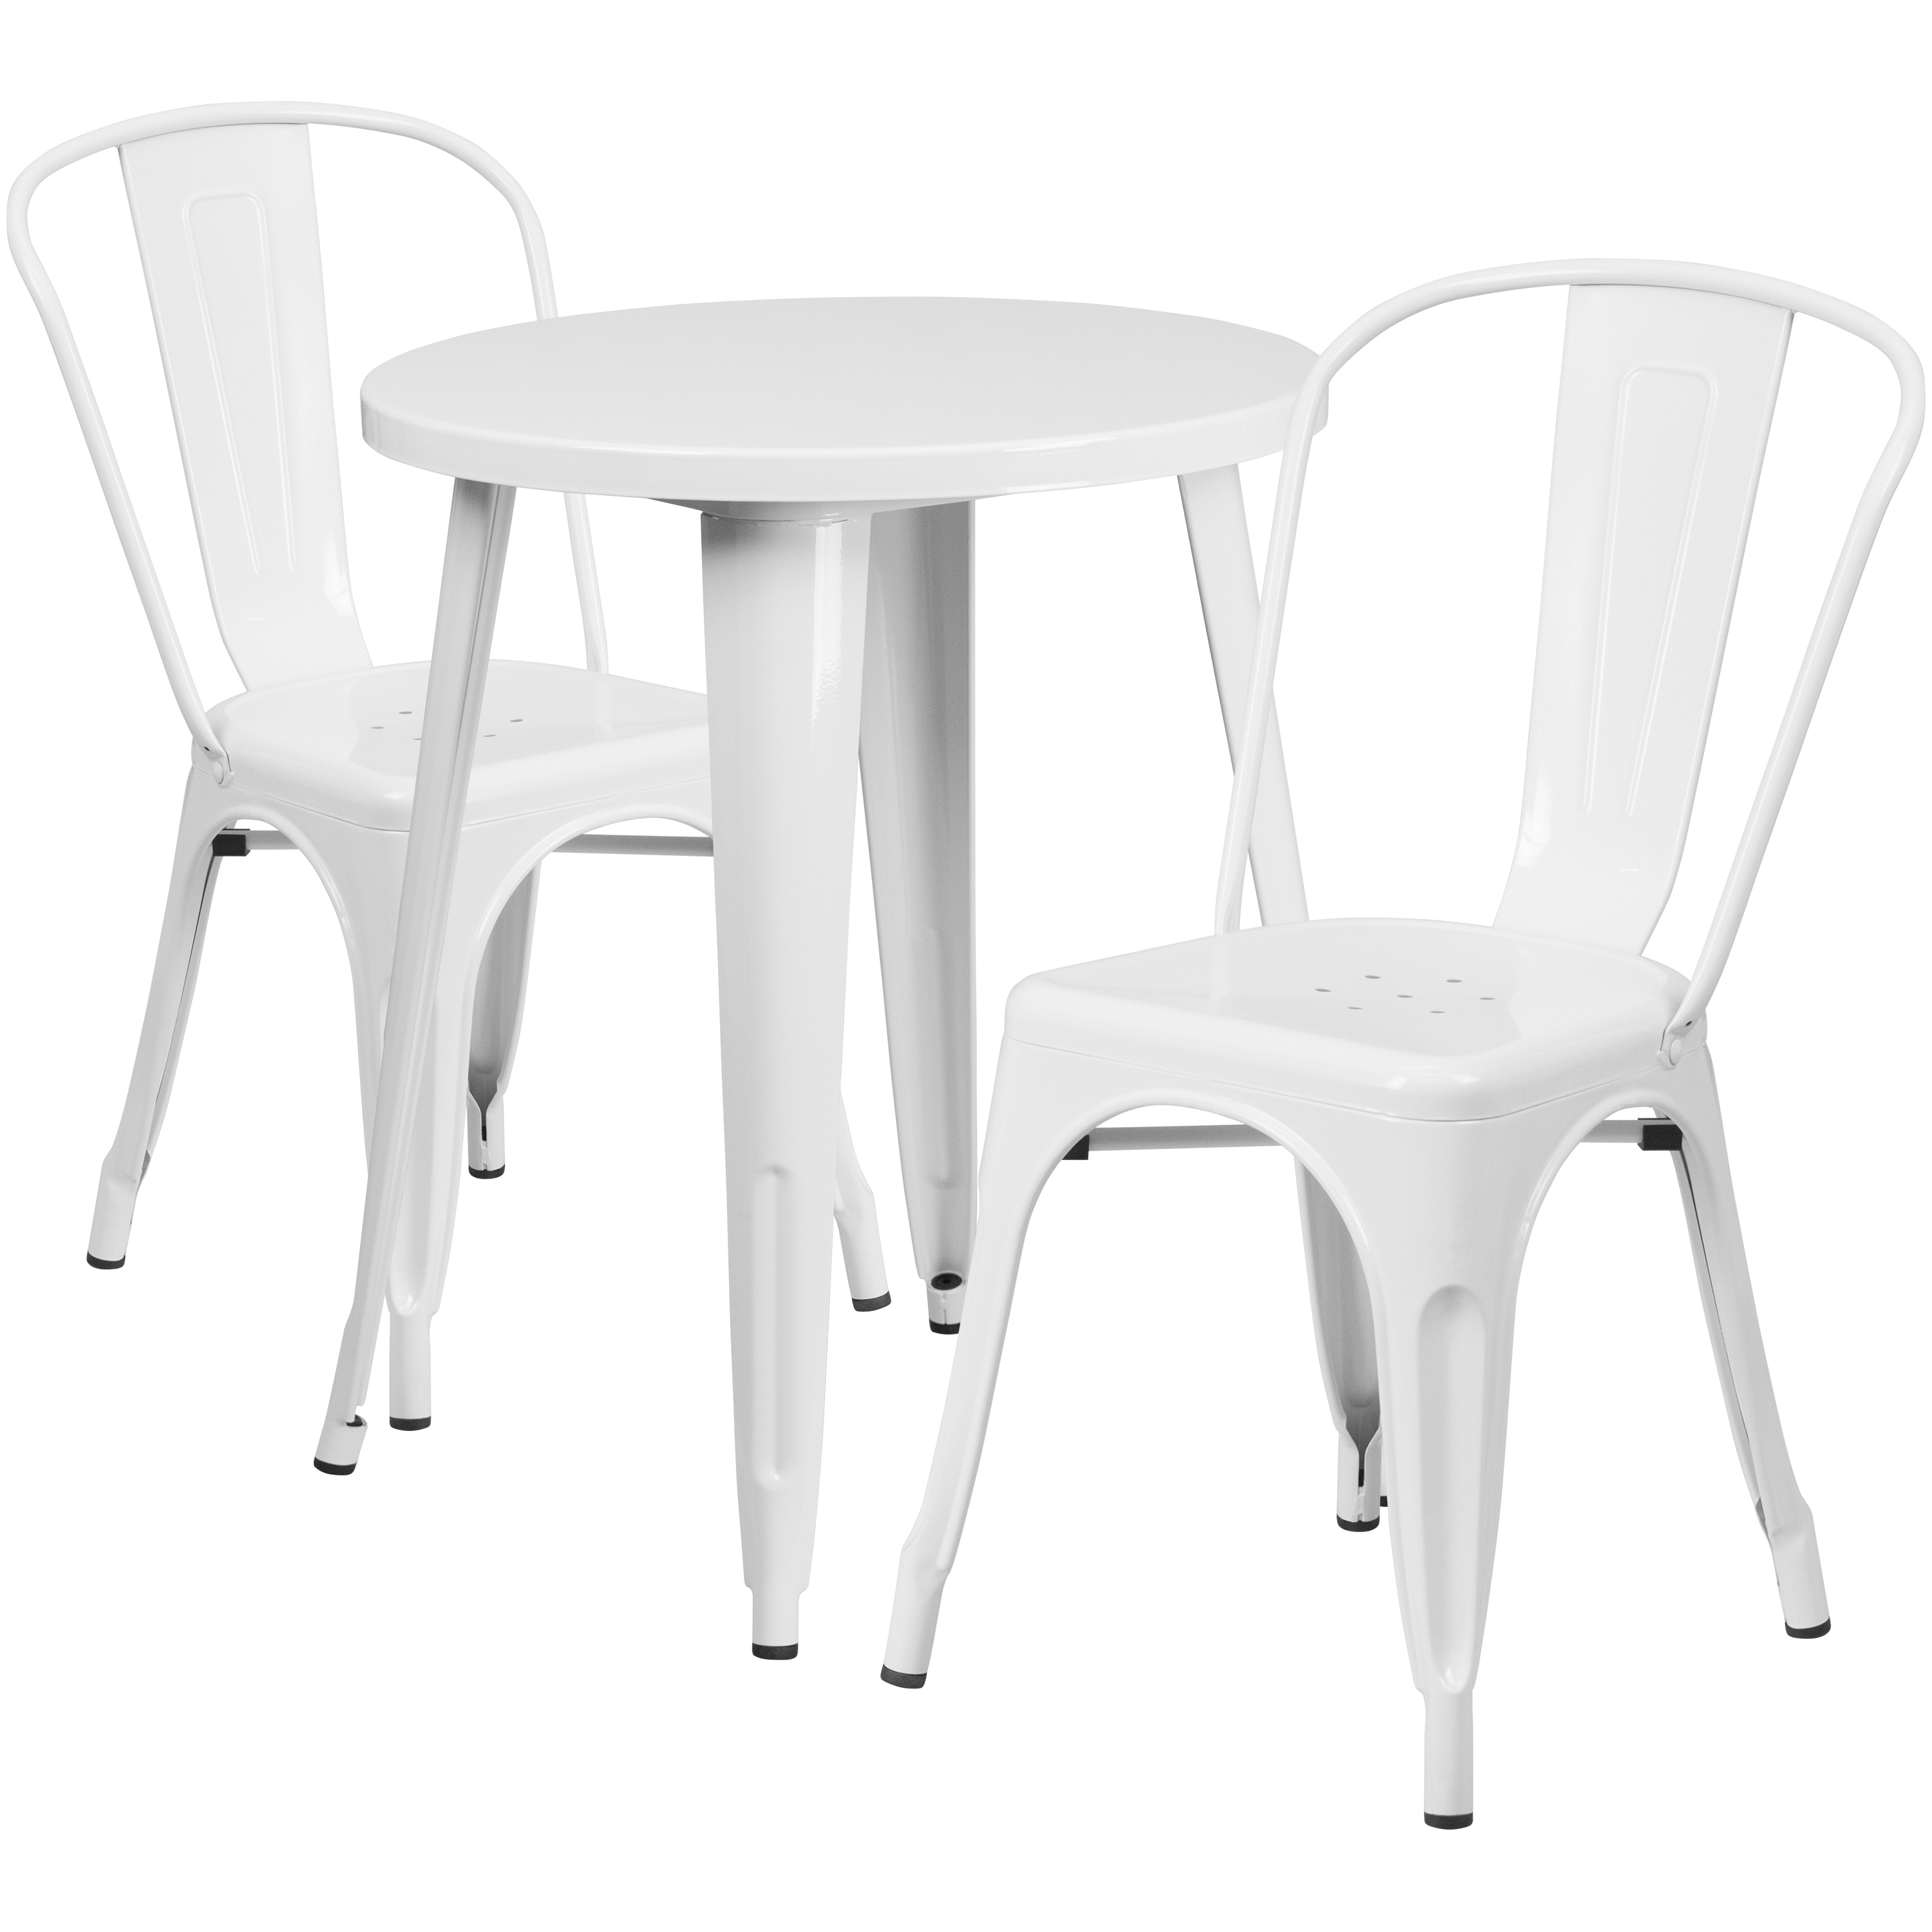 Flash Furniture Napoleon Commercial Grade 24" Round White Metal Indoor-Outdoor Table Set with 2 Cafe Chairs - image 1 of 5